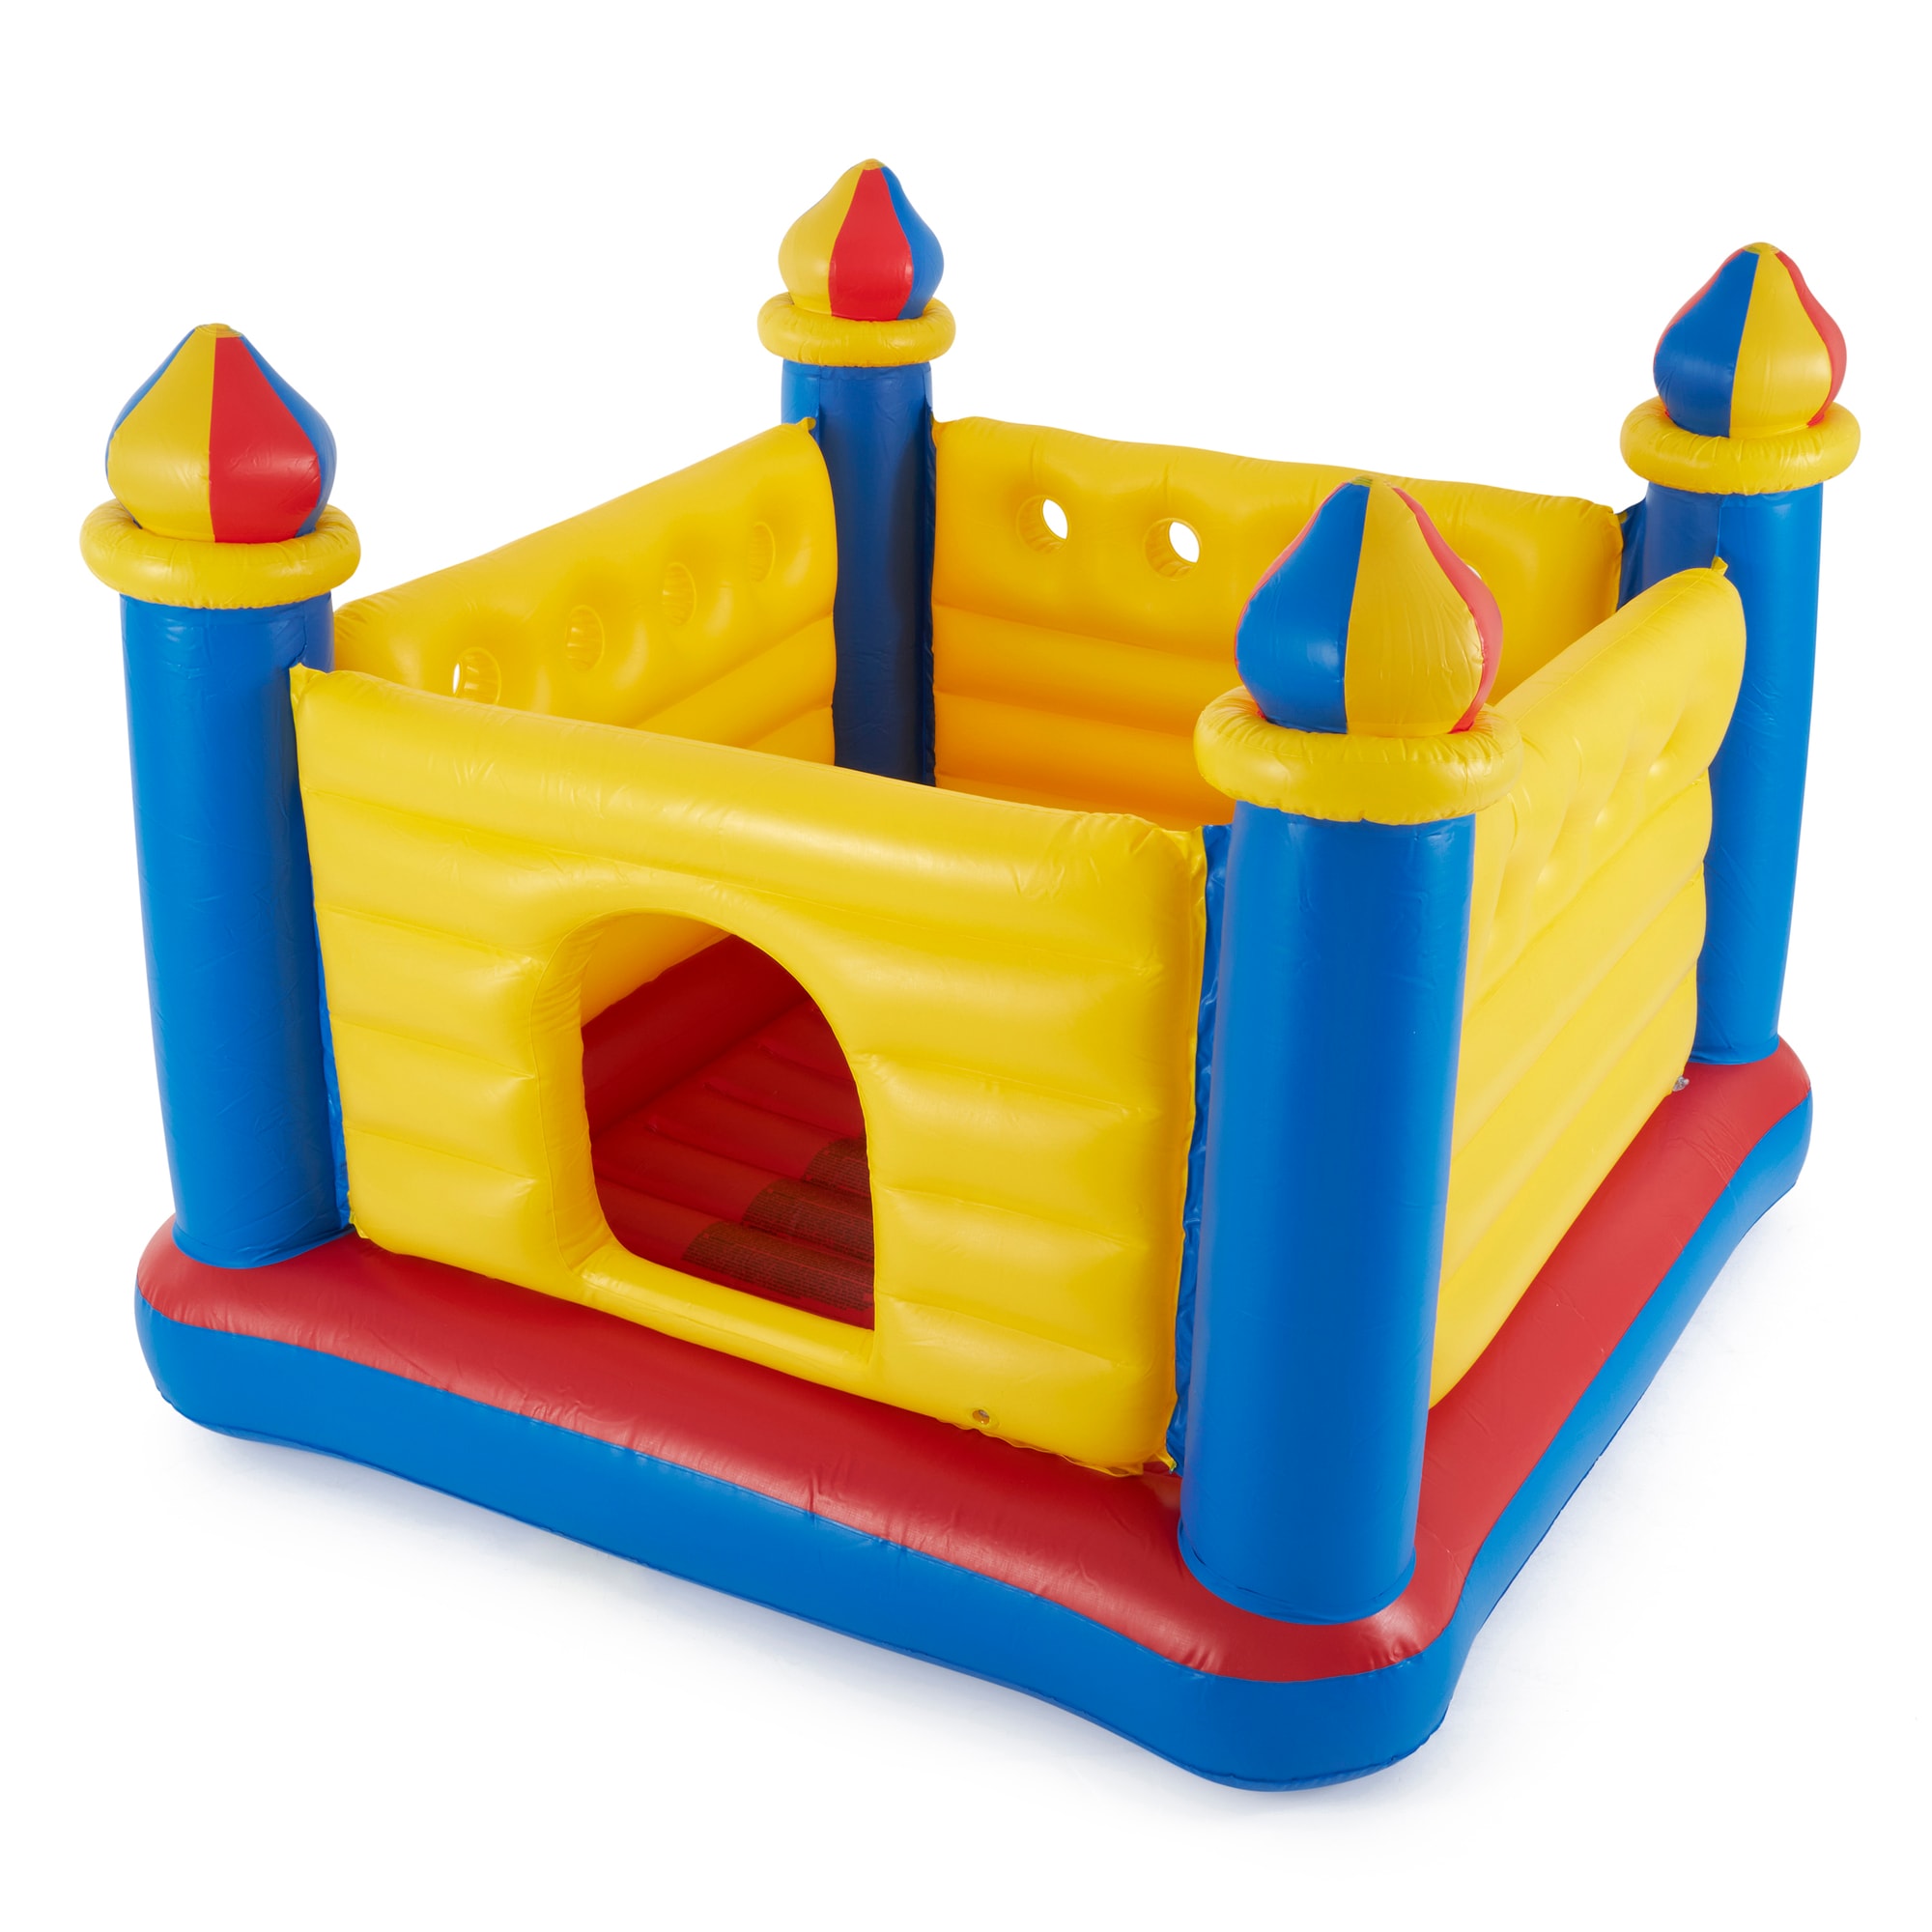 Inflatable Colorful Jump-O-Lene Kids Ball Pit Castle Bouncer | Outdoor Bounce House for Ages 3-6 | Multi-Color Vinyl | Blower Included | - Intex 23692